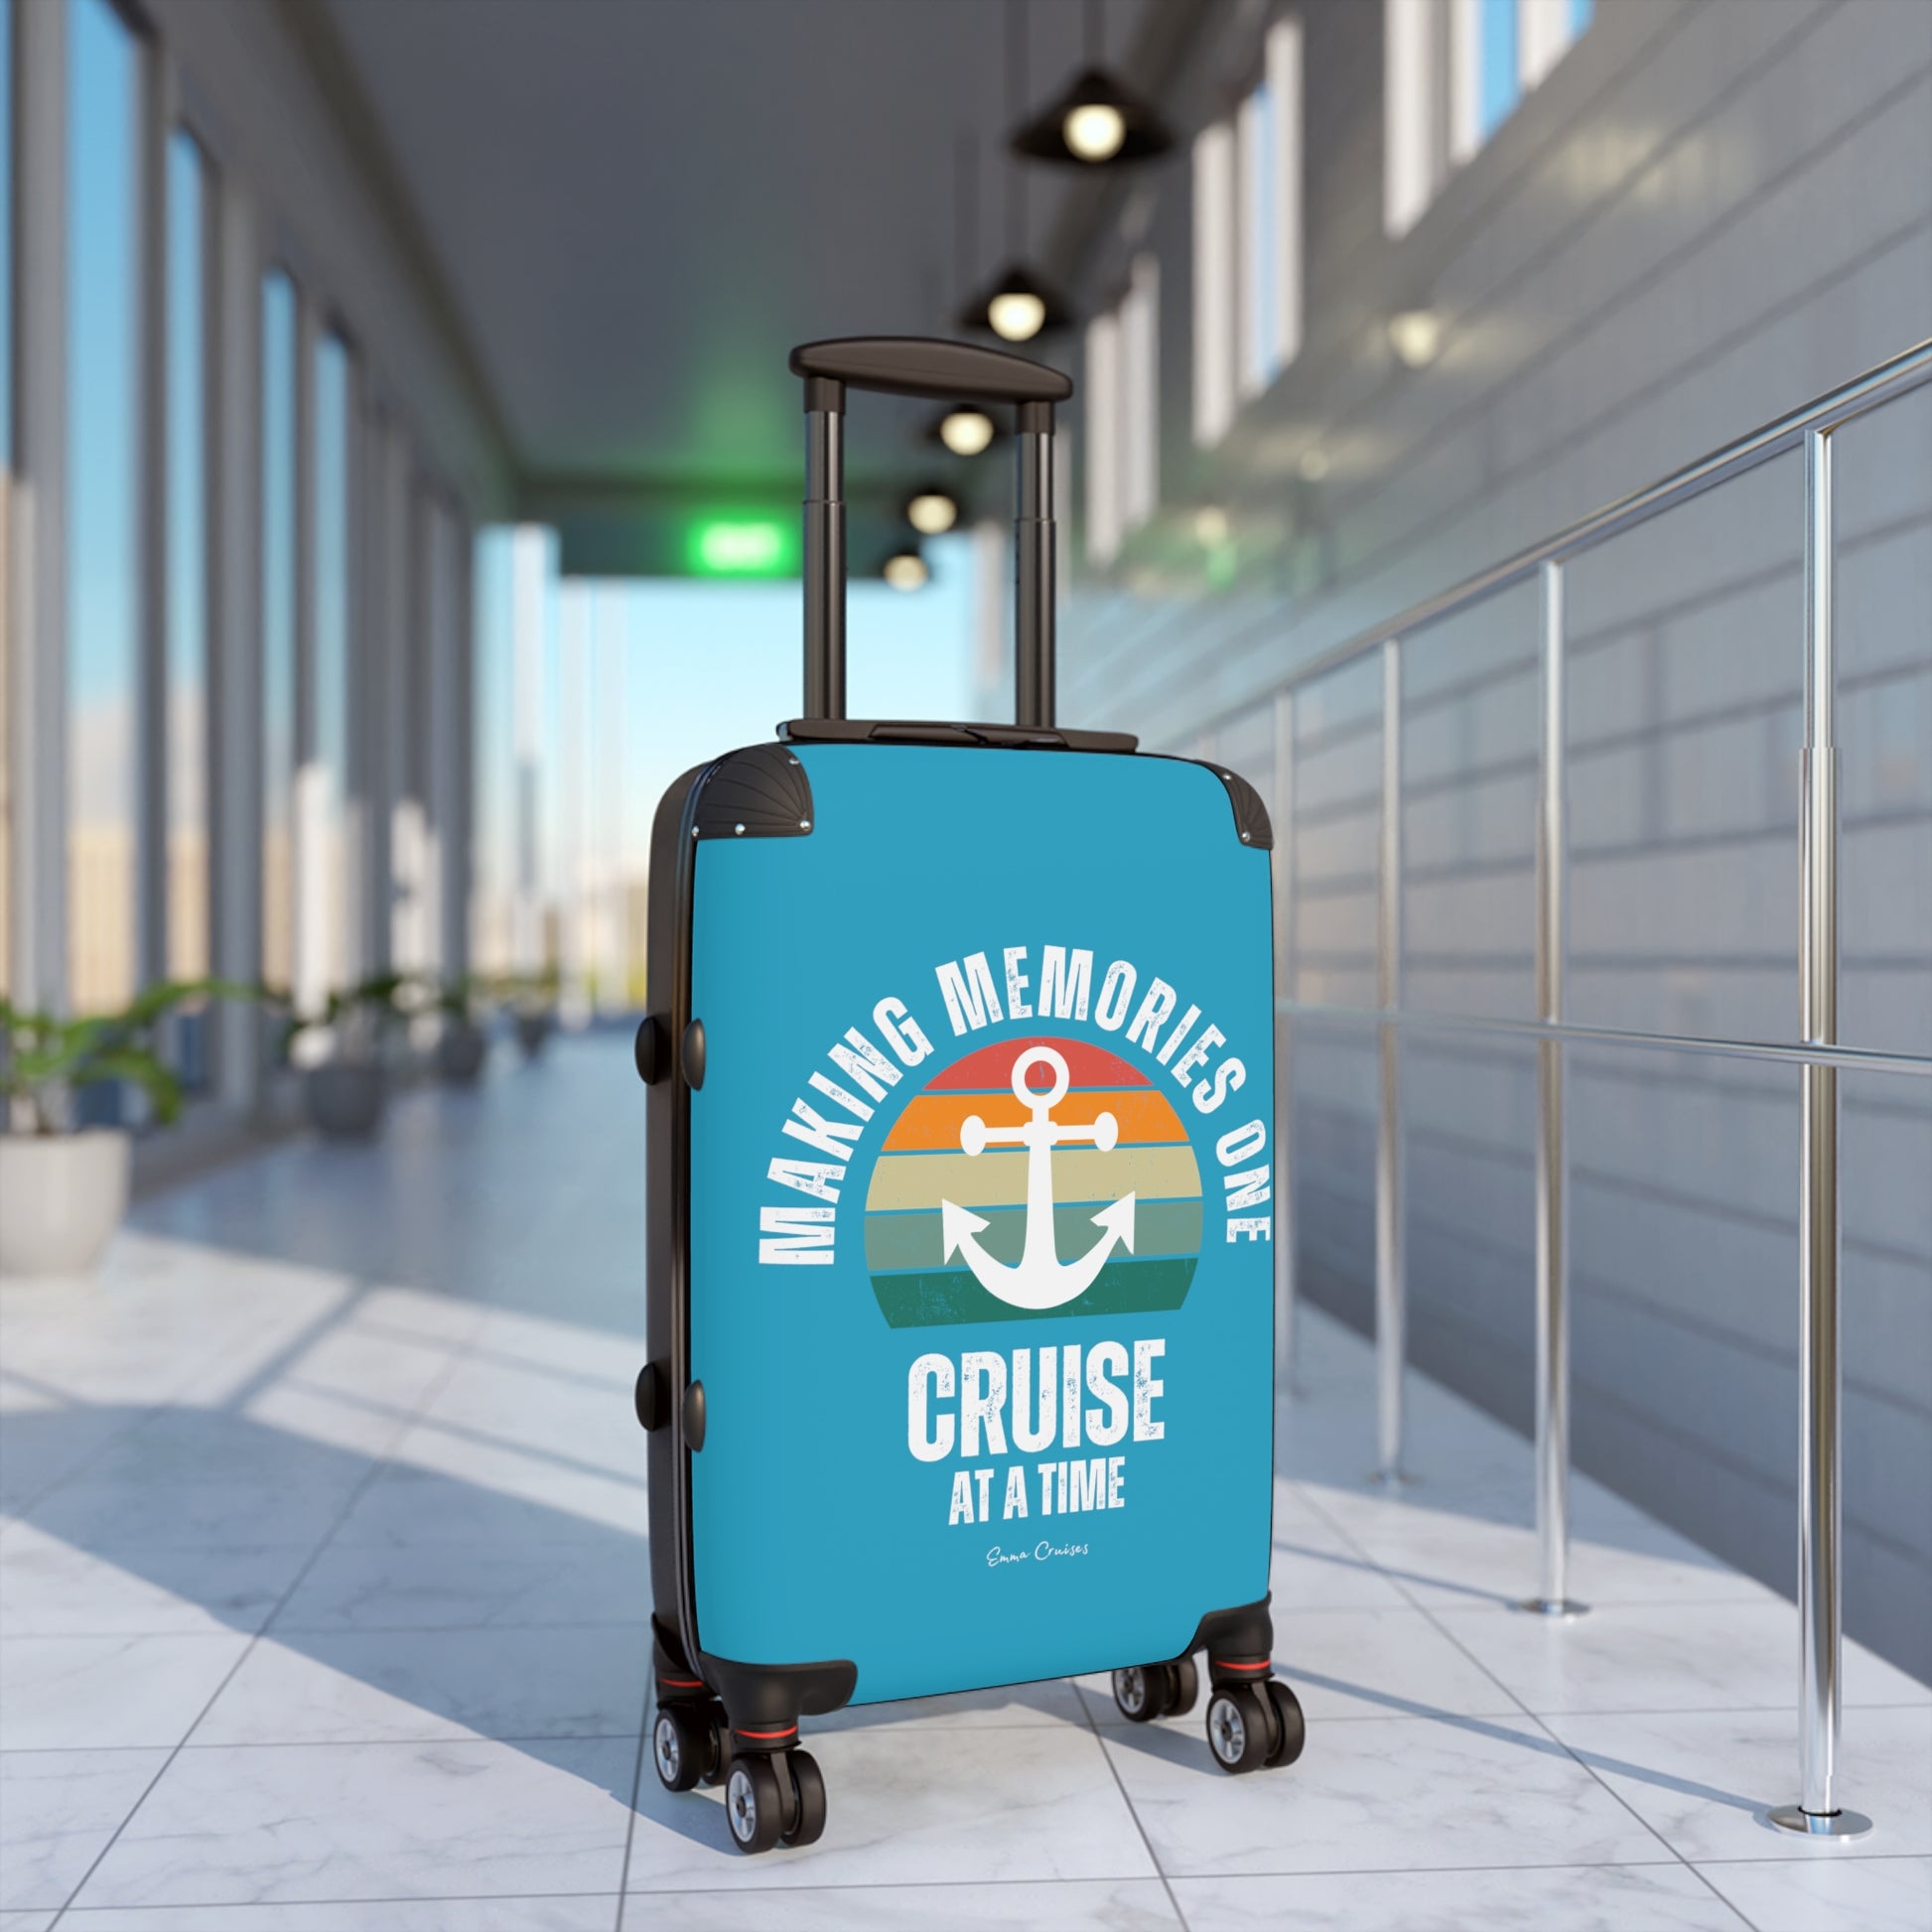 Making Memories One Cruise at a Time - Bag – Emma Cruises